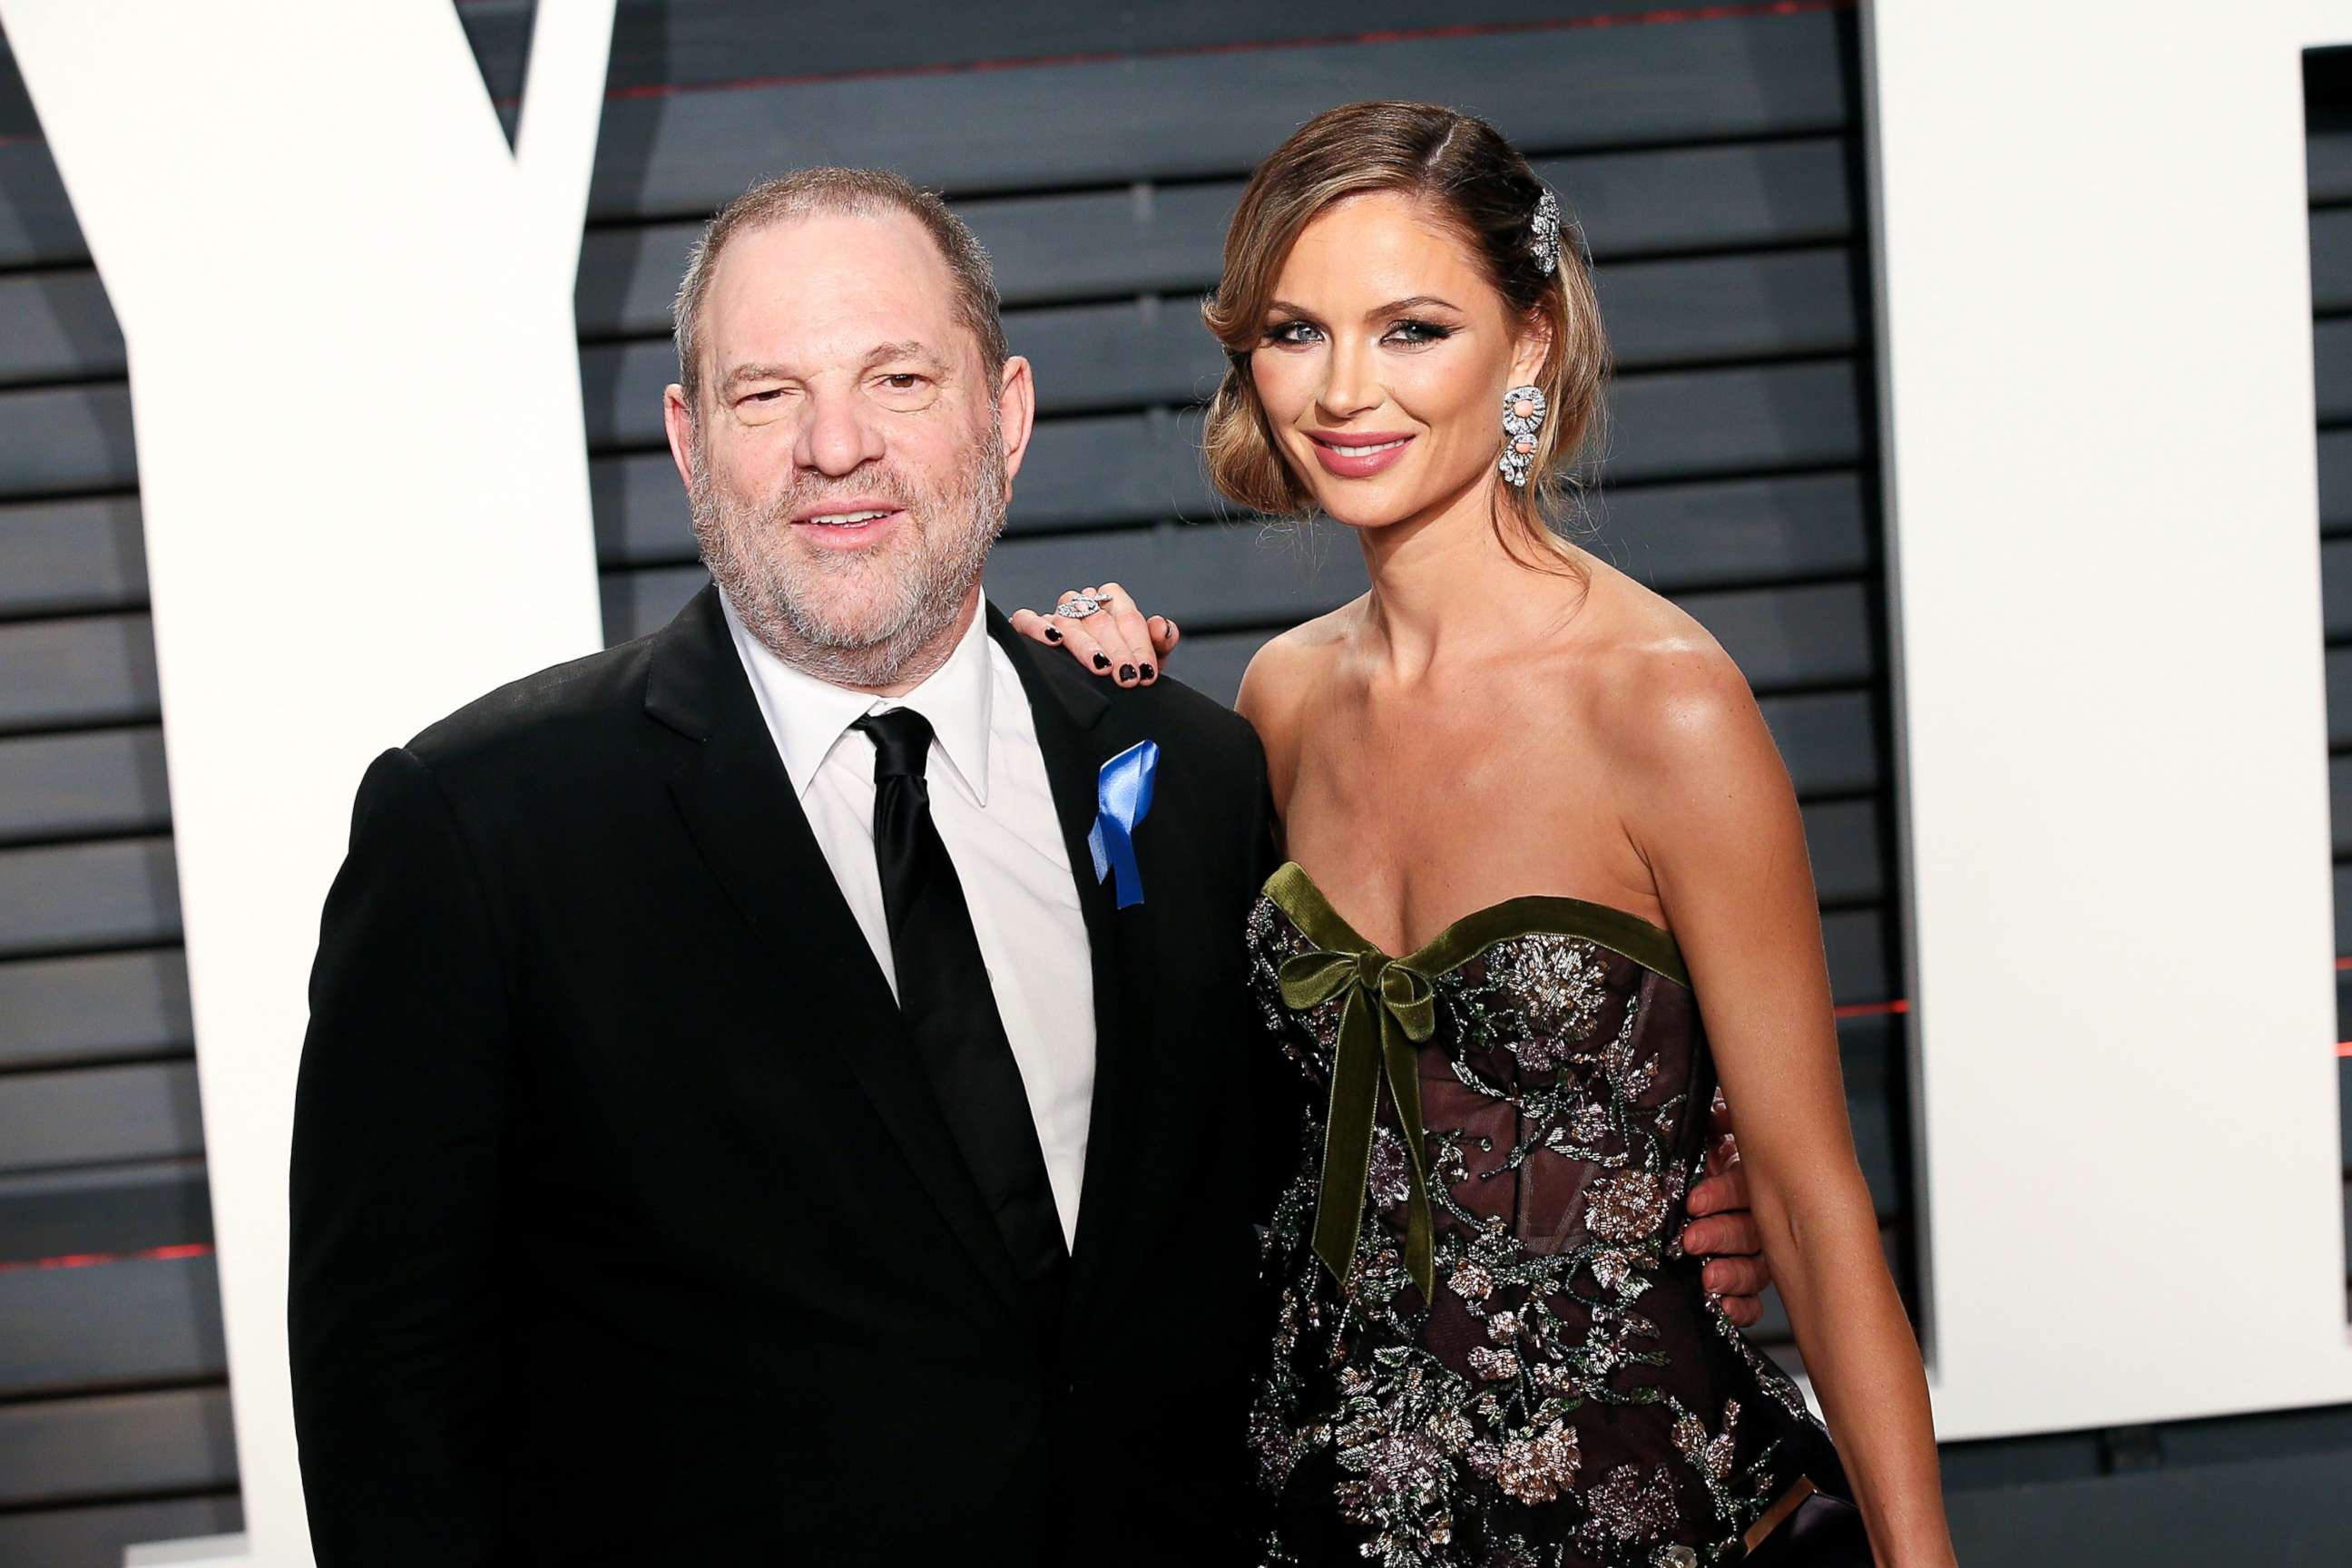 PHOTO: Harvey Weinstein and Georgina Chapman attend the 2017 Vanity Fair Oscar Party, Feb. 26, 2017, in Beverly Hills, Calif.